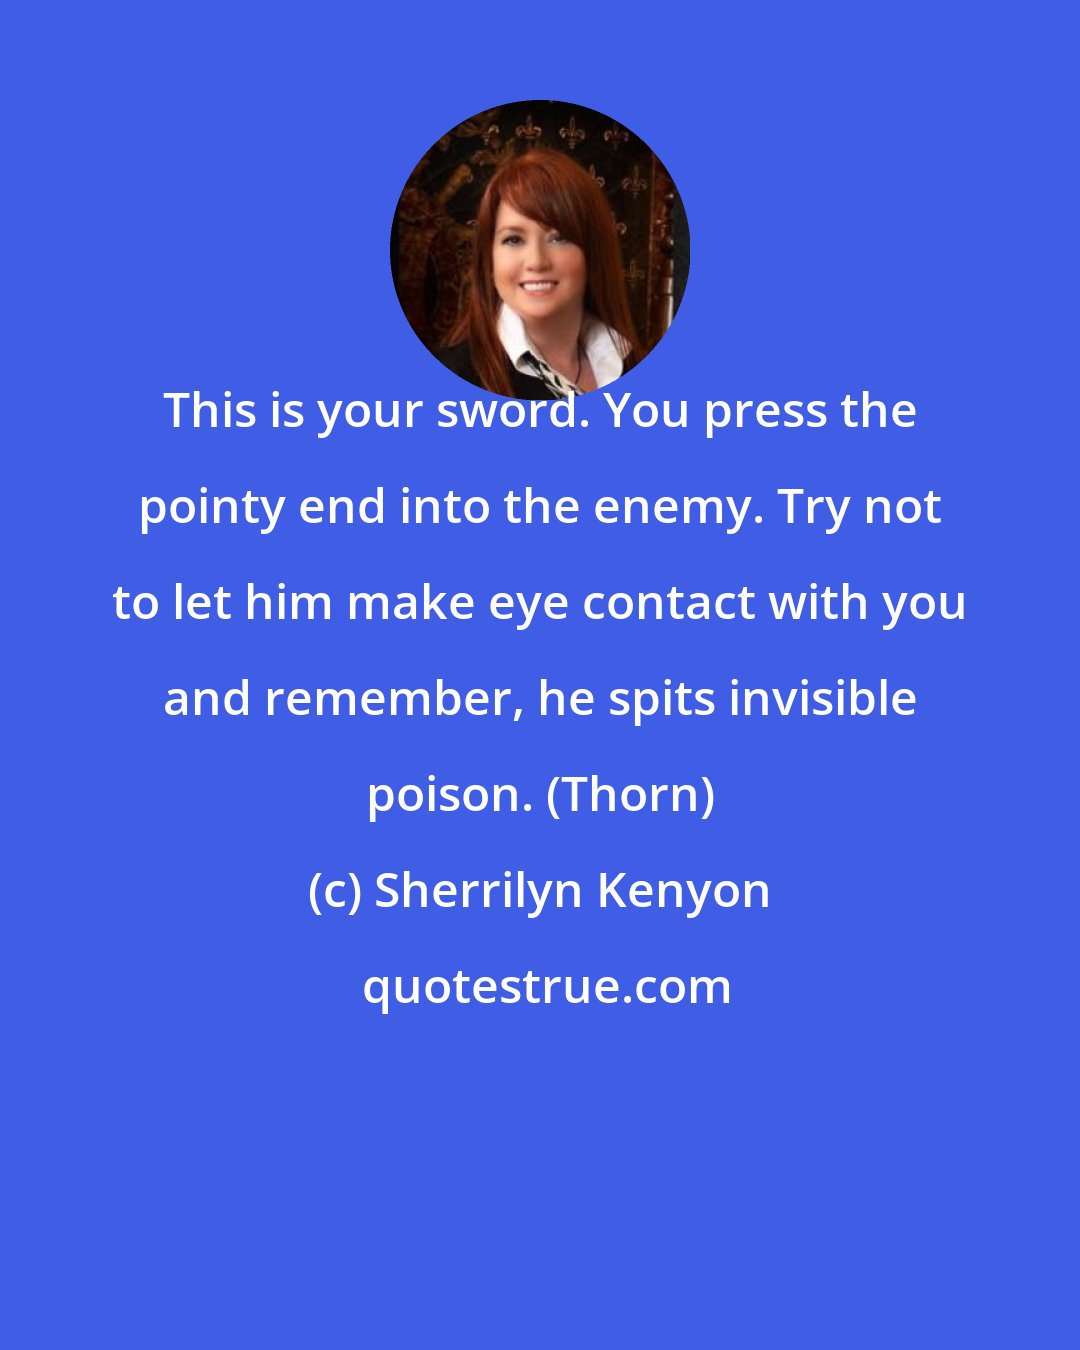 Sherrilyn Kenyon: This is your sword. You press the pointy end into the enemy. Try not to let him make eye contact with you and remember, he spits invisible poison. (Thorn)